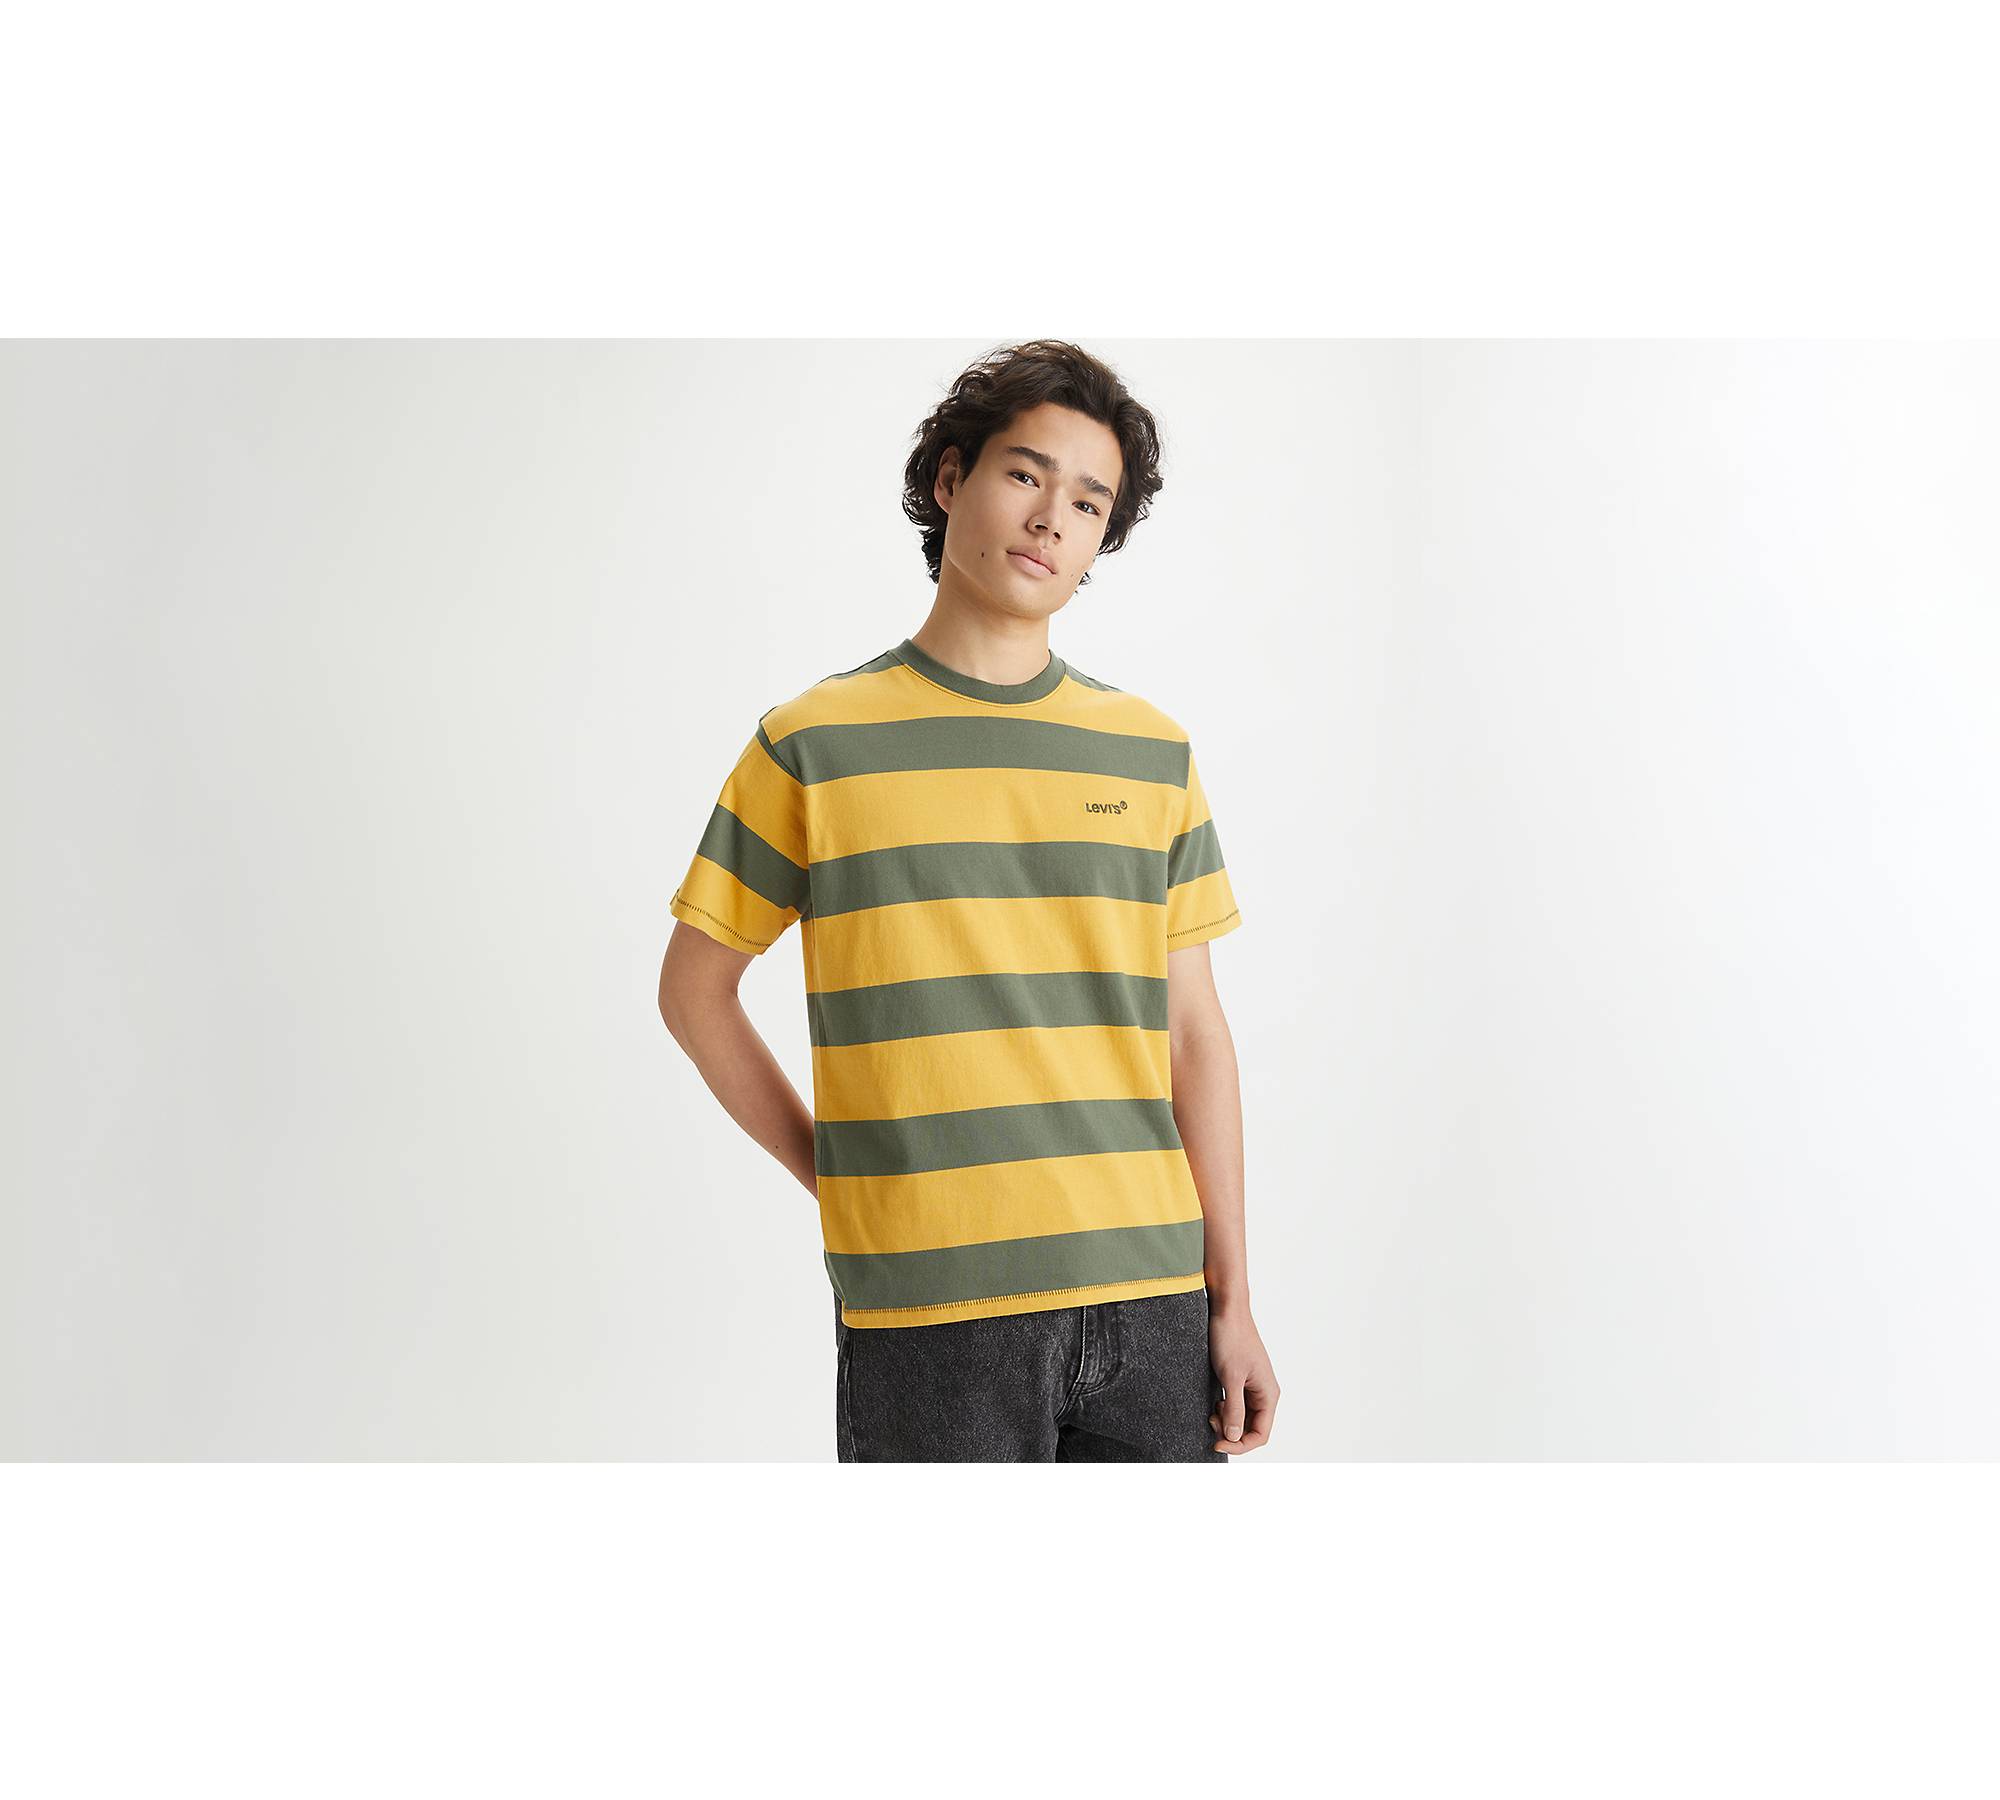 finansiere Foster Institut Red Tab™ Vintage T-shirt - Green | Levi's® US